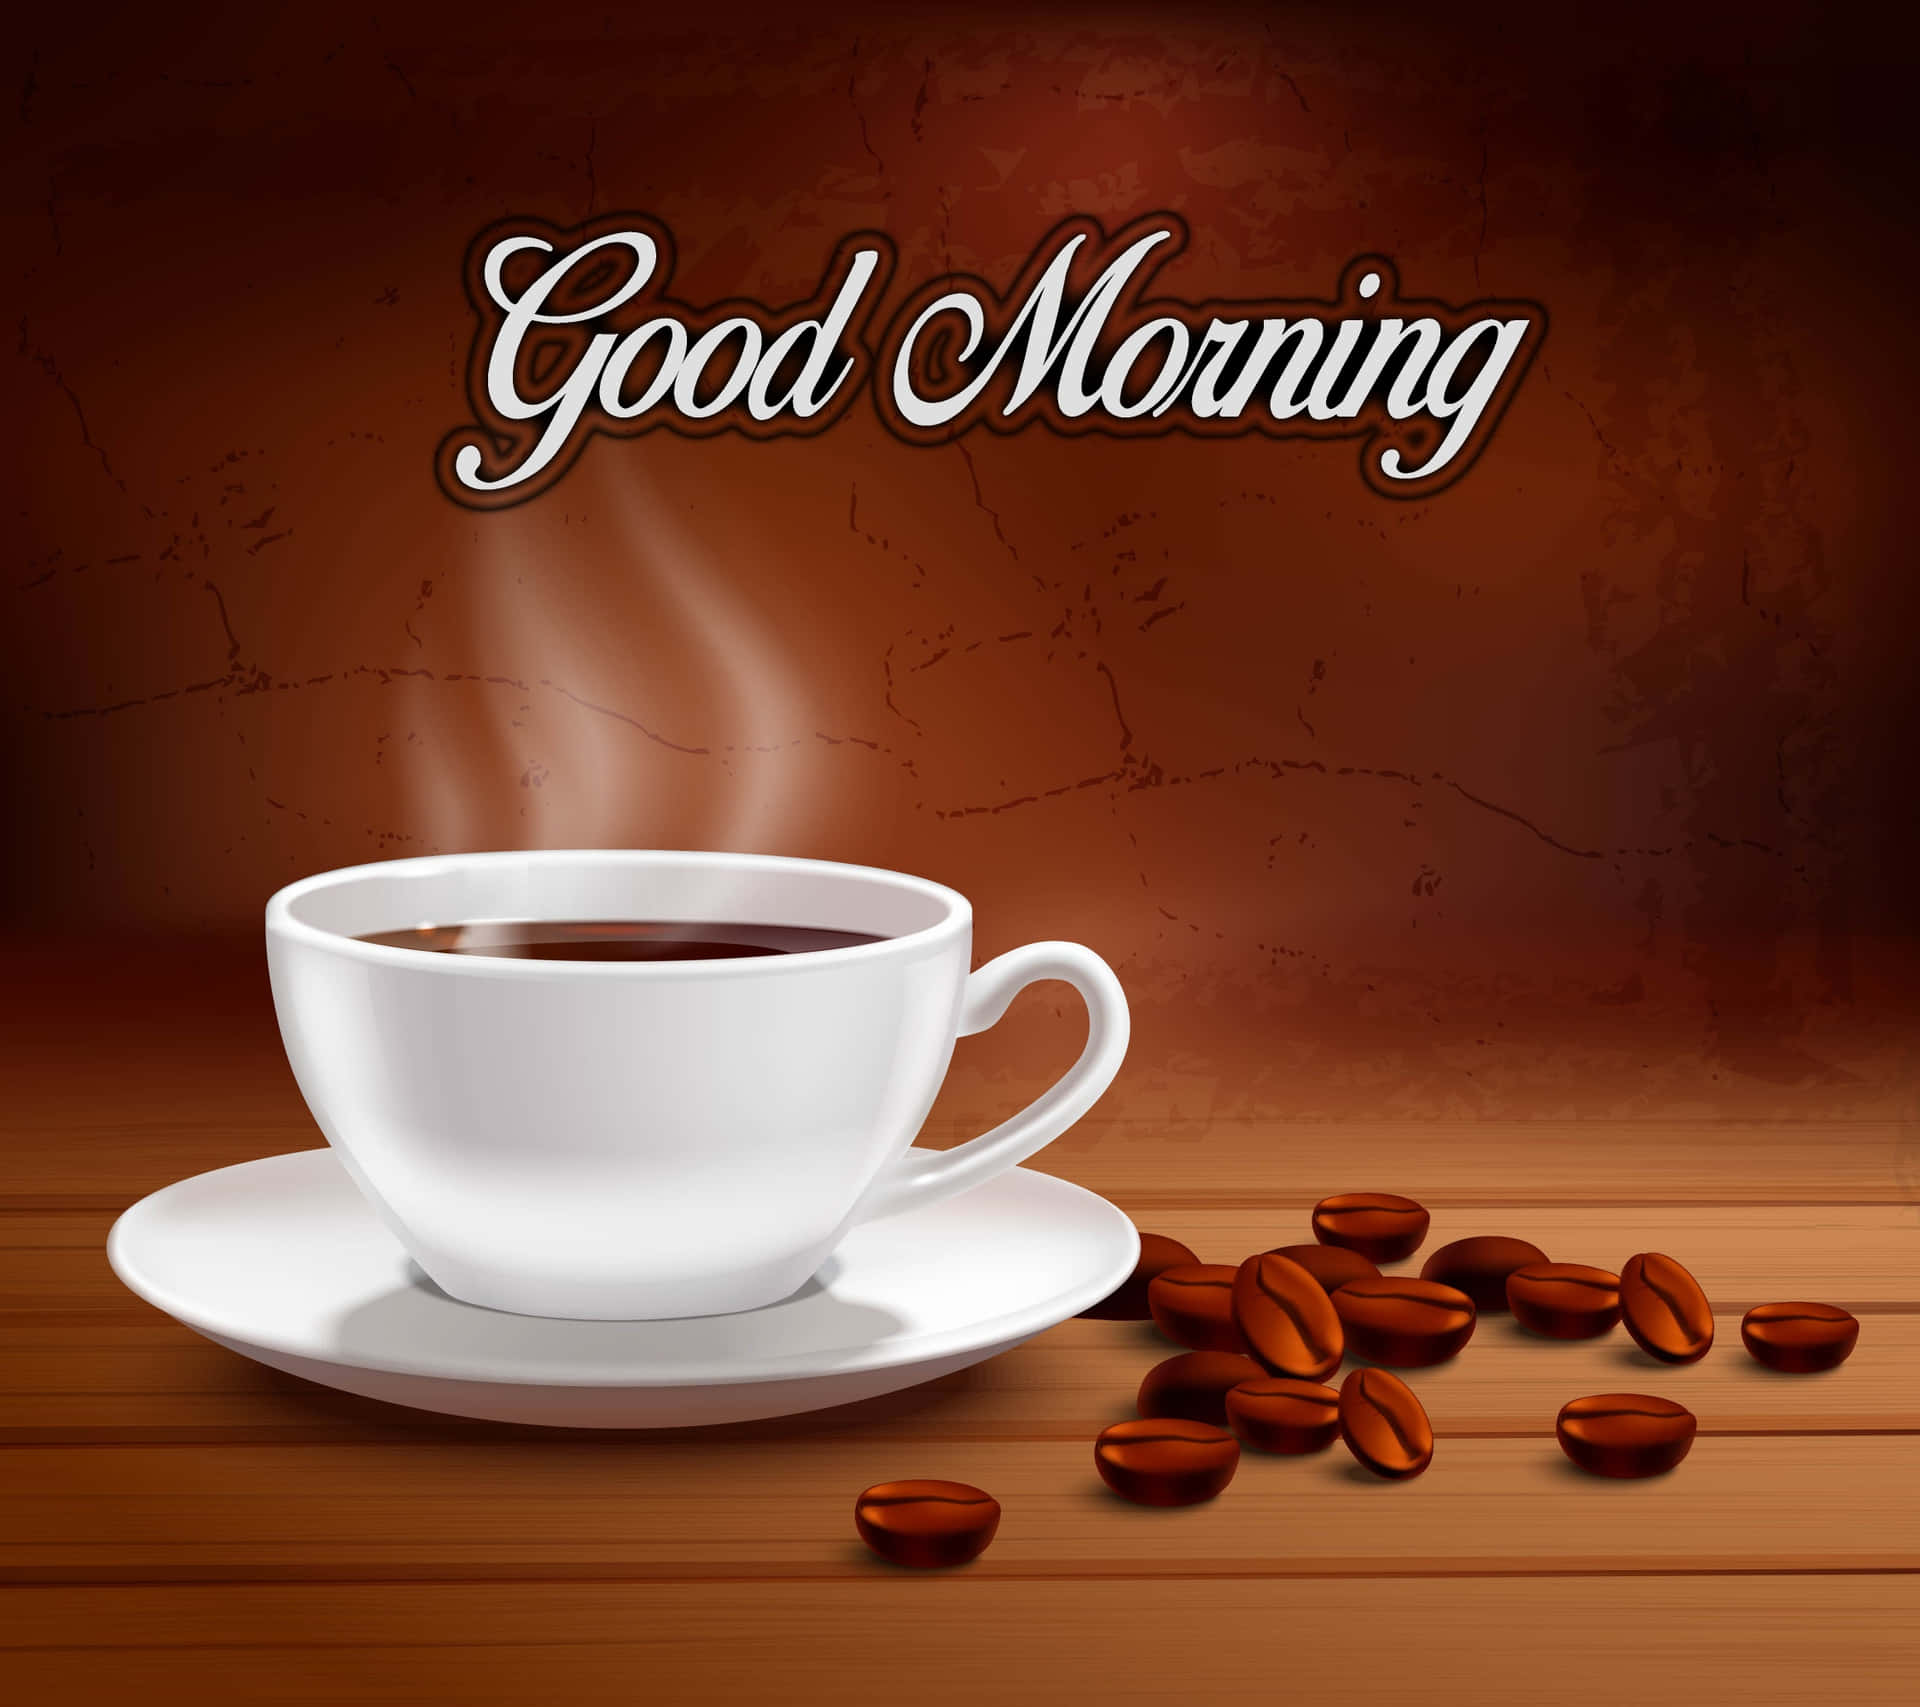 Enjoy a peaceful morning with a warm cup of coffee.